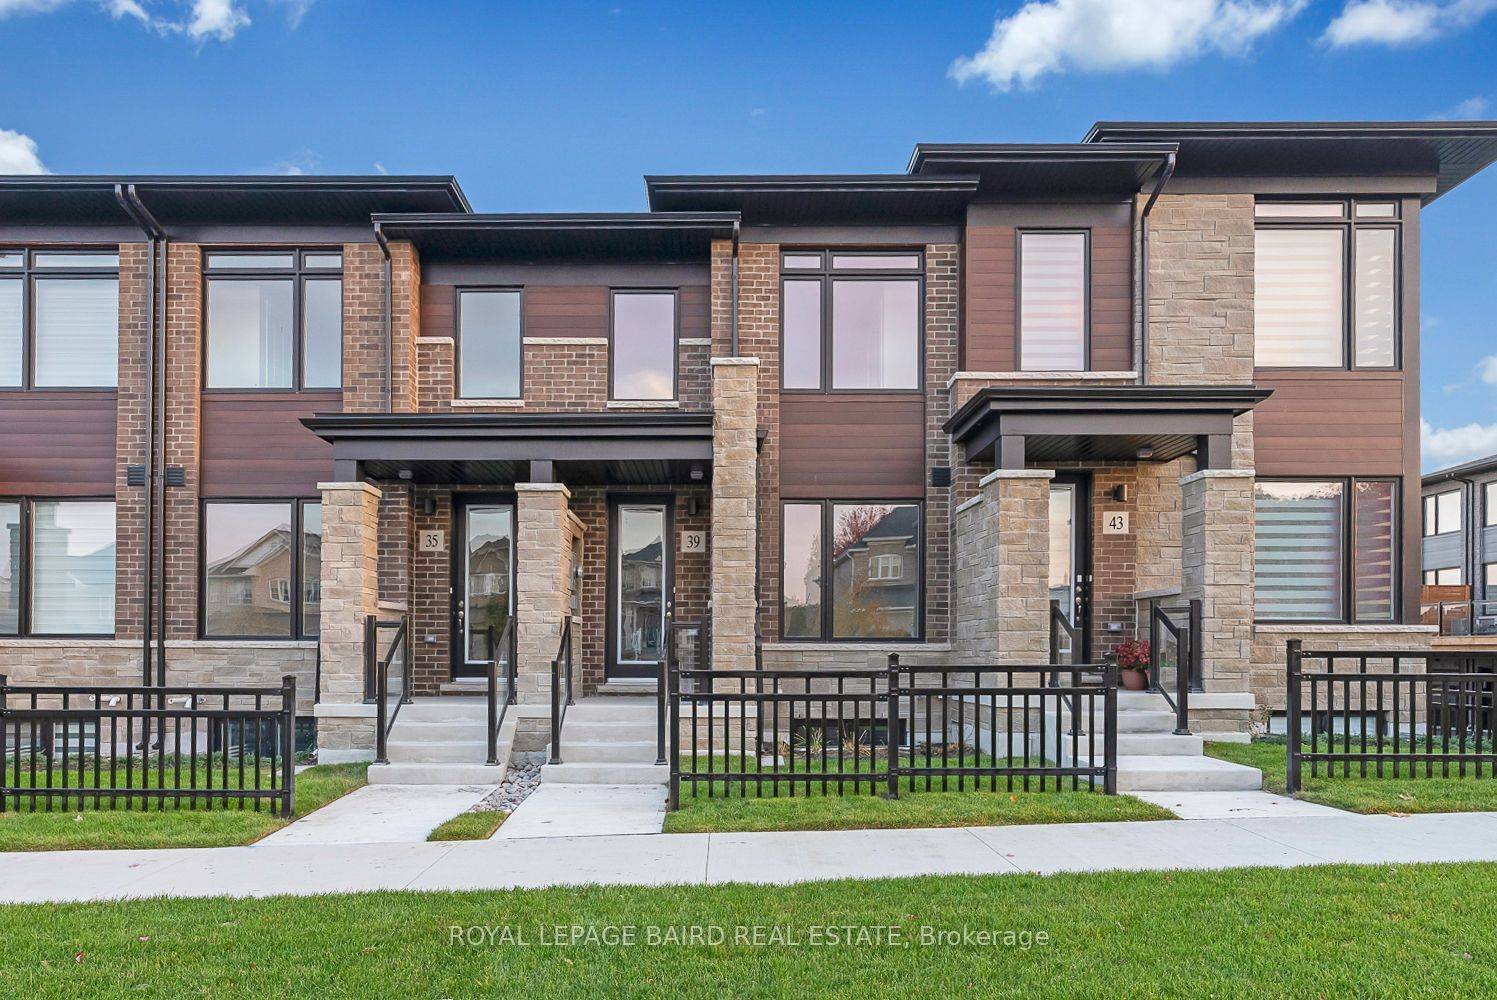 Brand New 4 Bedroom Luxury Townhome Built By Eastrose Homes.